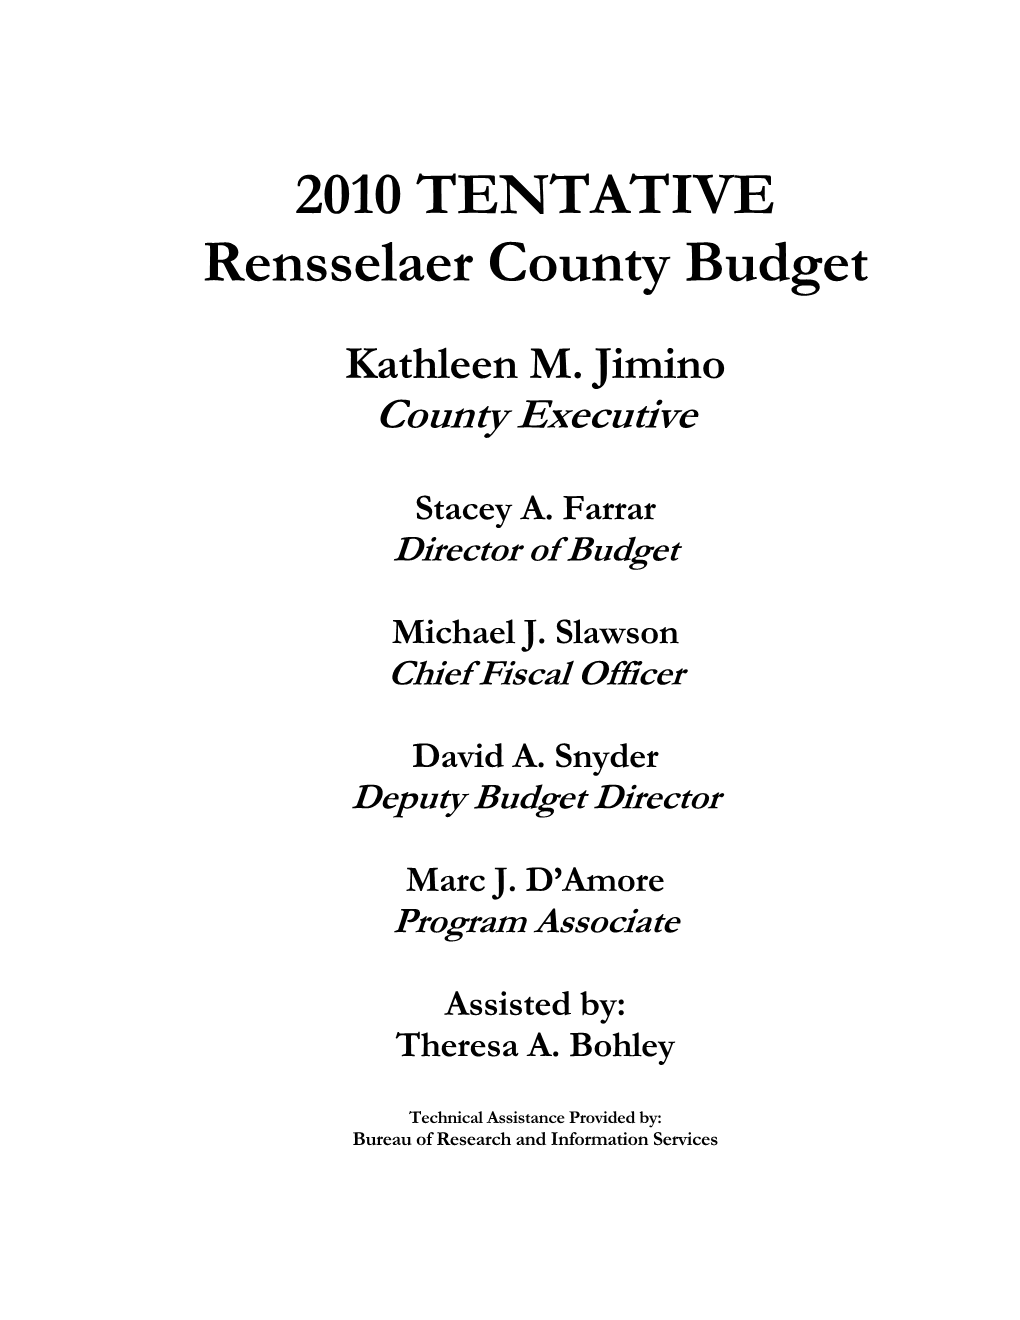 2010 Tentative Budget - Summary of Tax Requirement